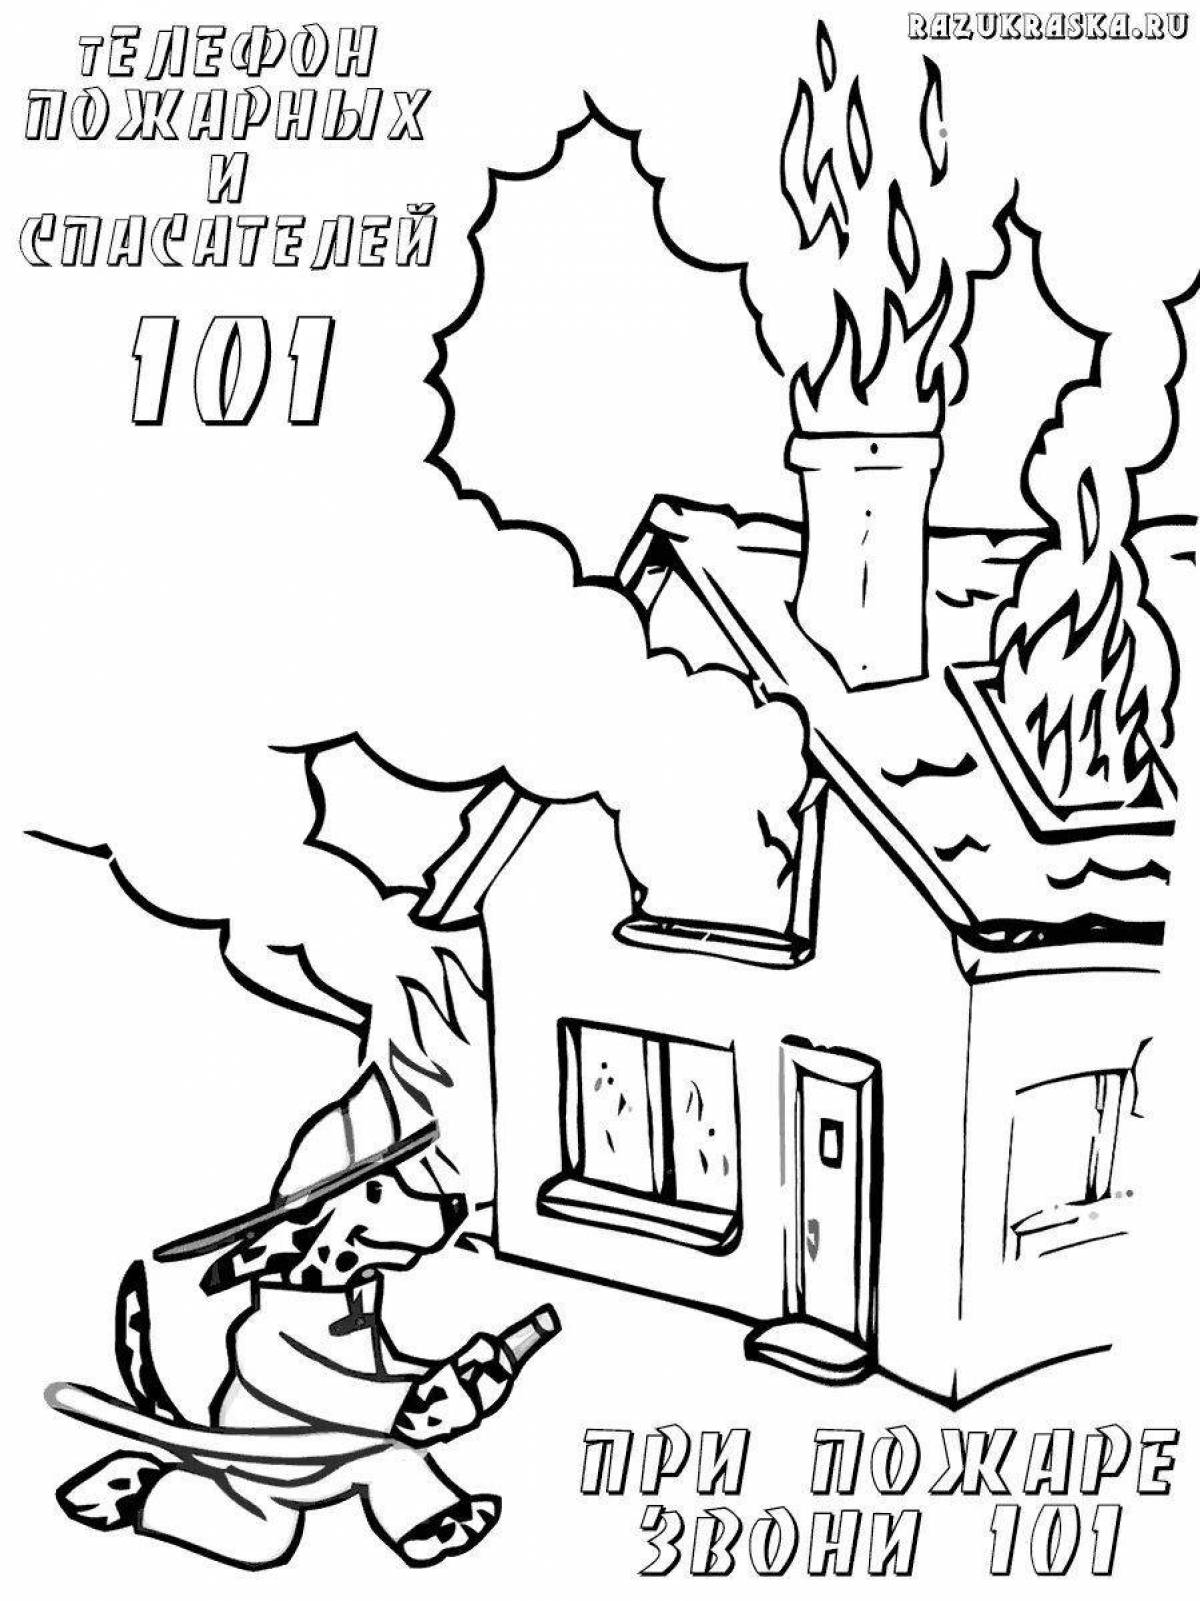 Funny fire safety coloring book